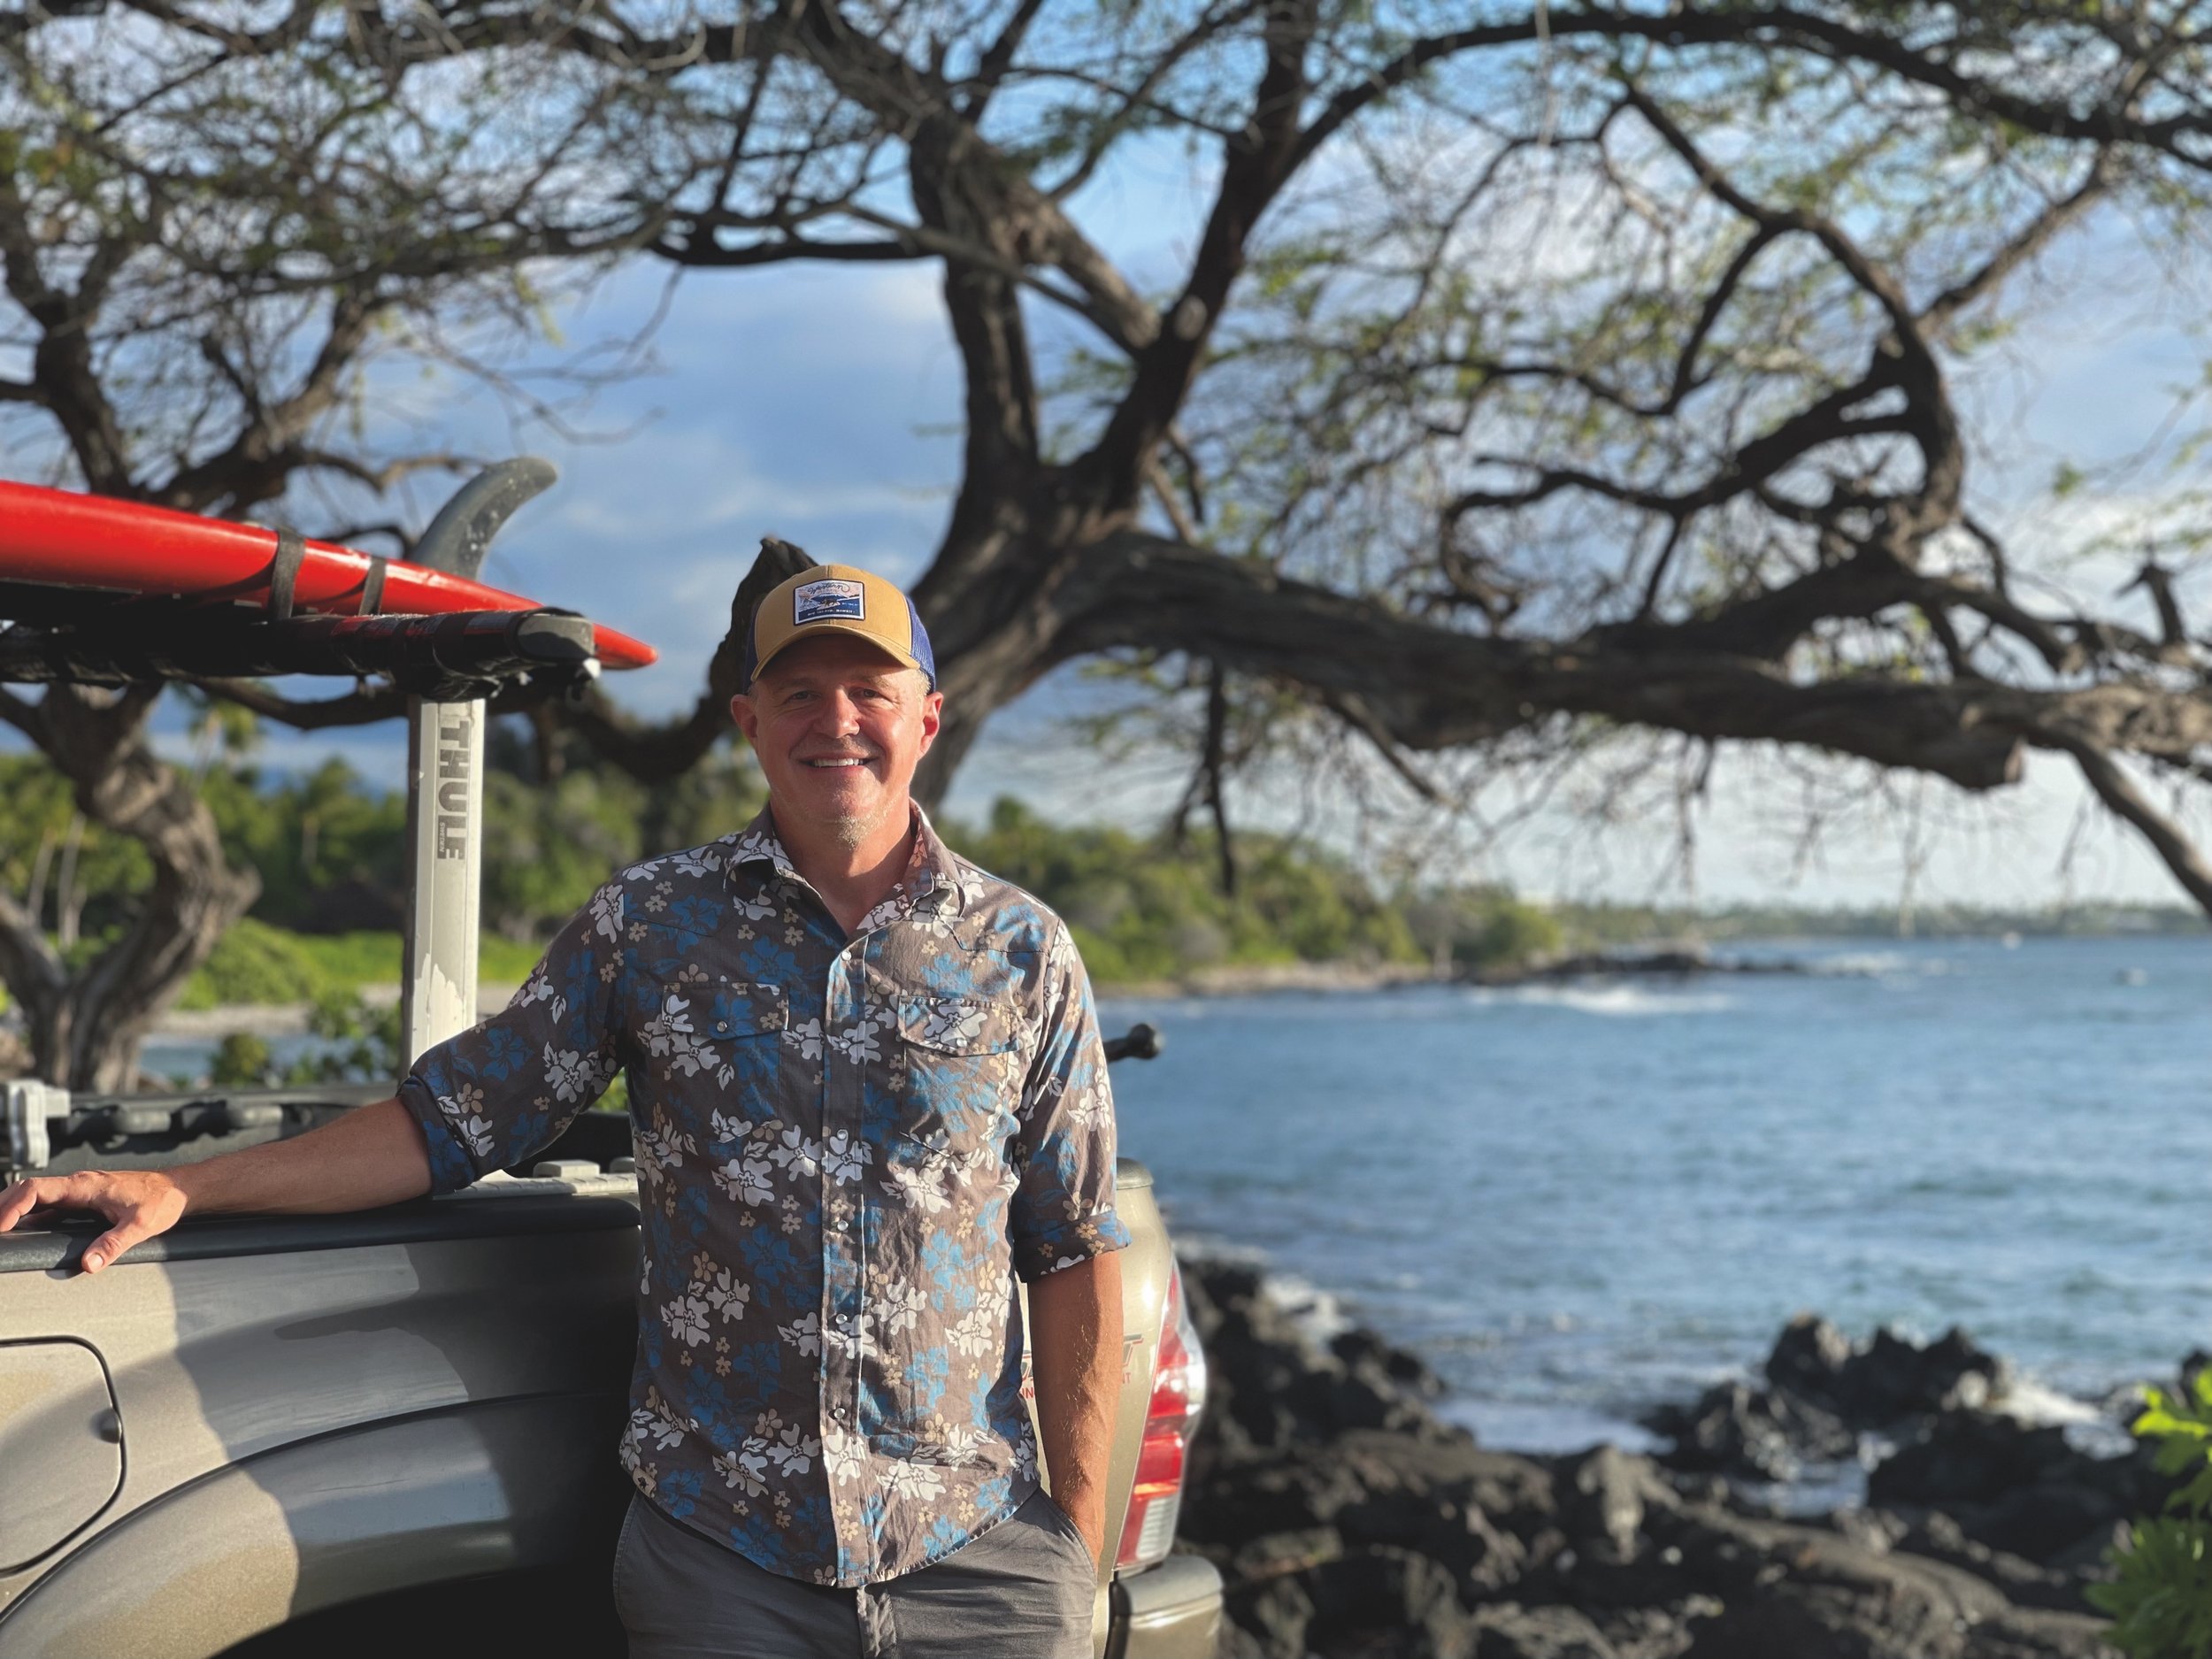  Sullivan and his Western Aloha ohana have vastly contributed to the brand’s success since 2018 and counting.   All photos courtesy Western Aloha/Paul Sullivan  